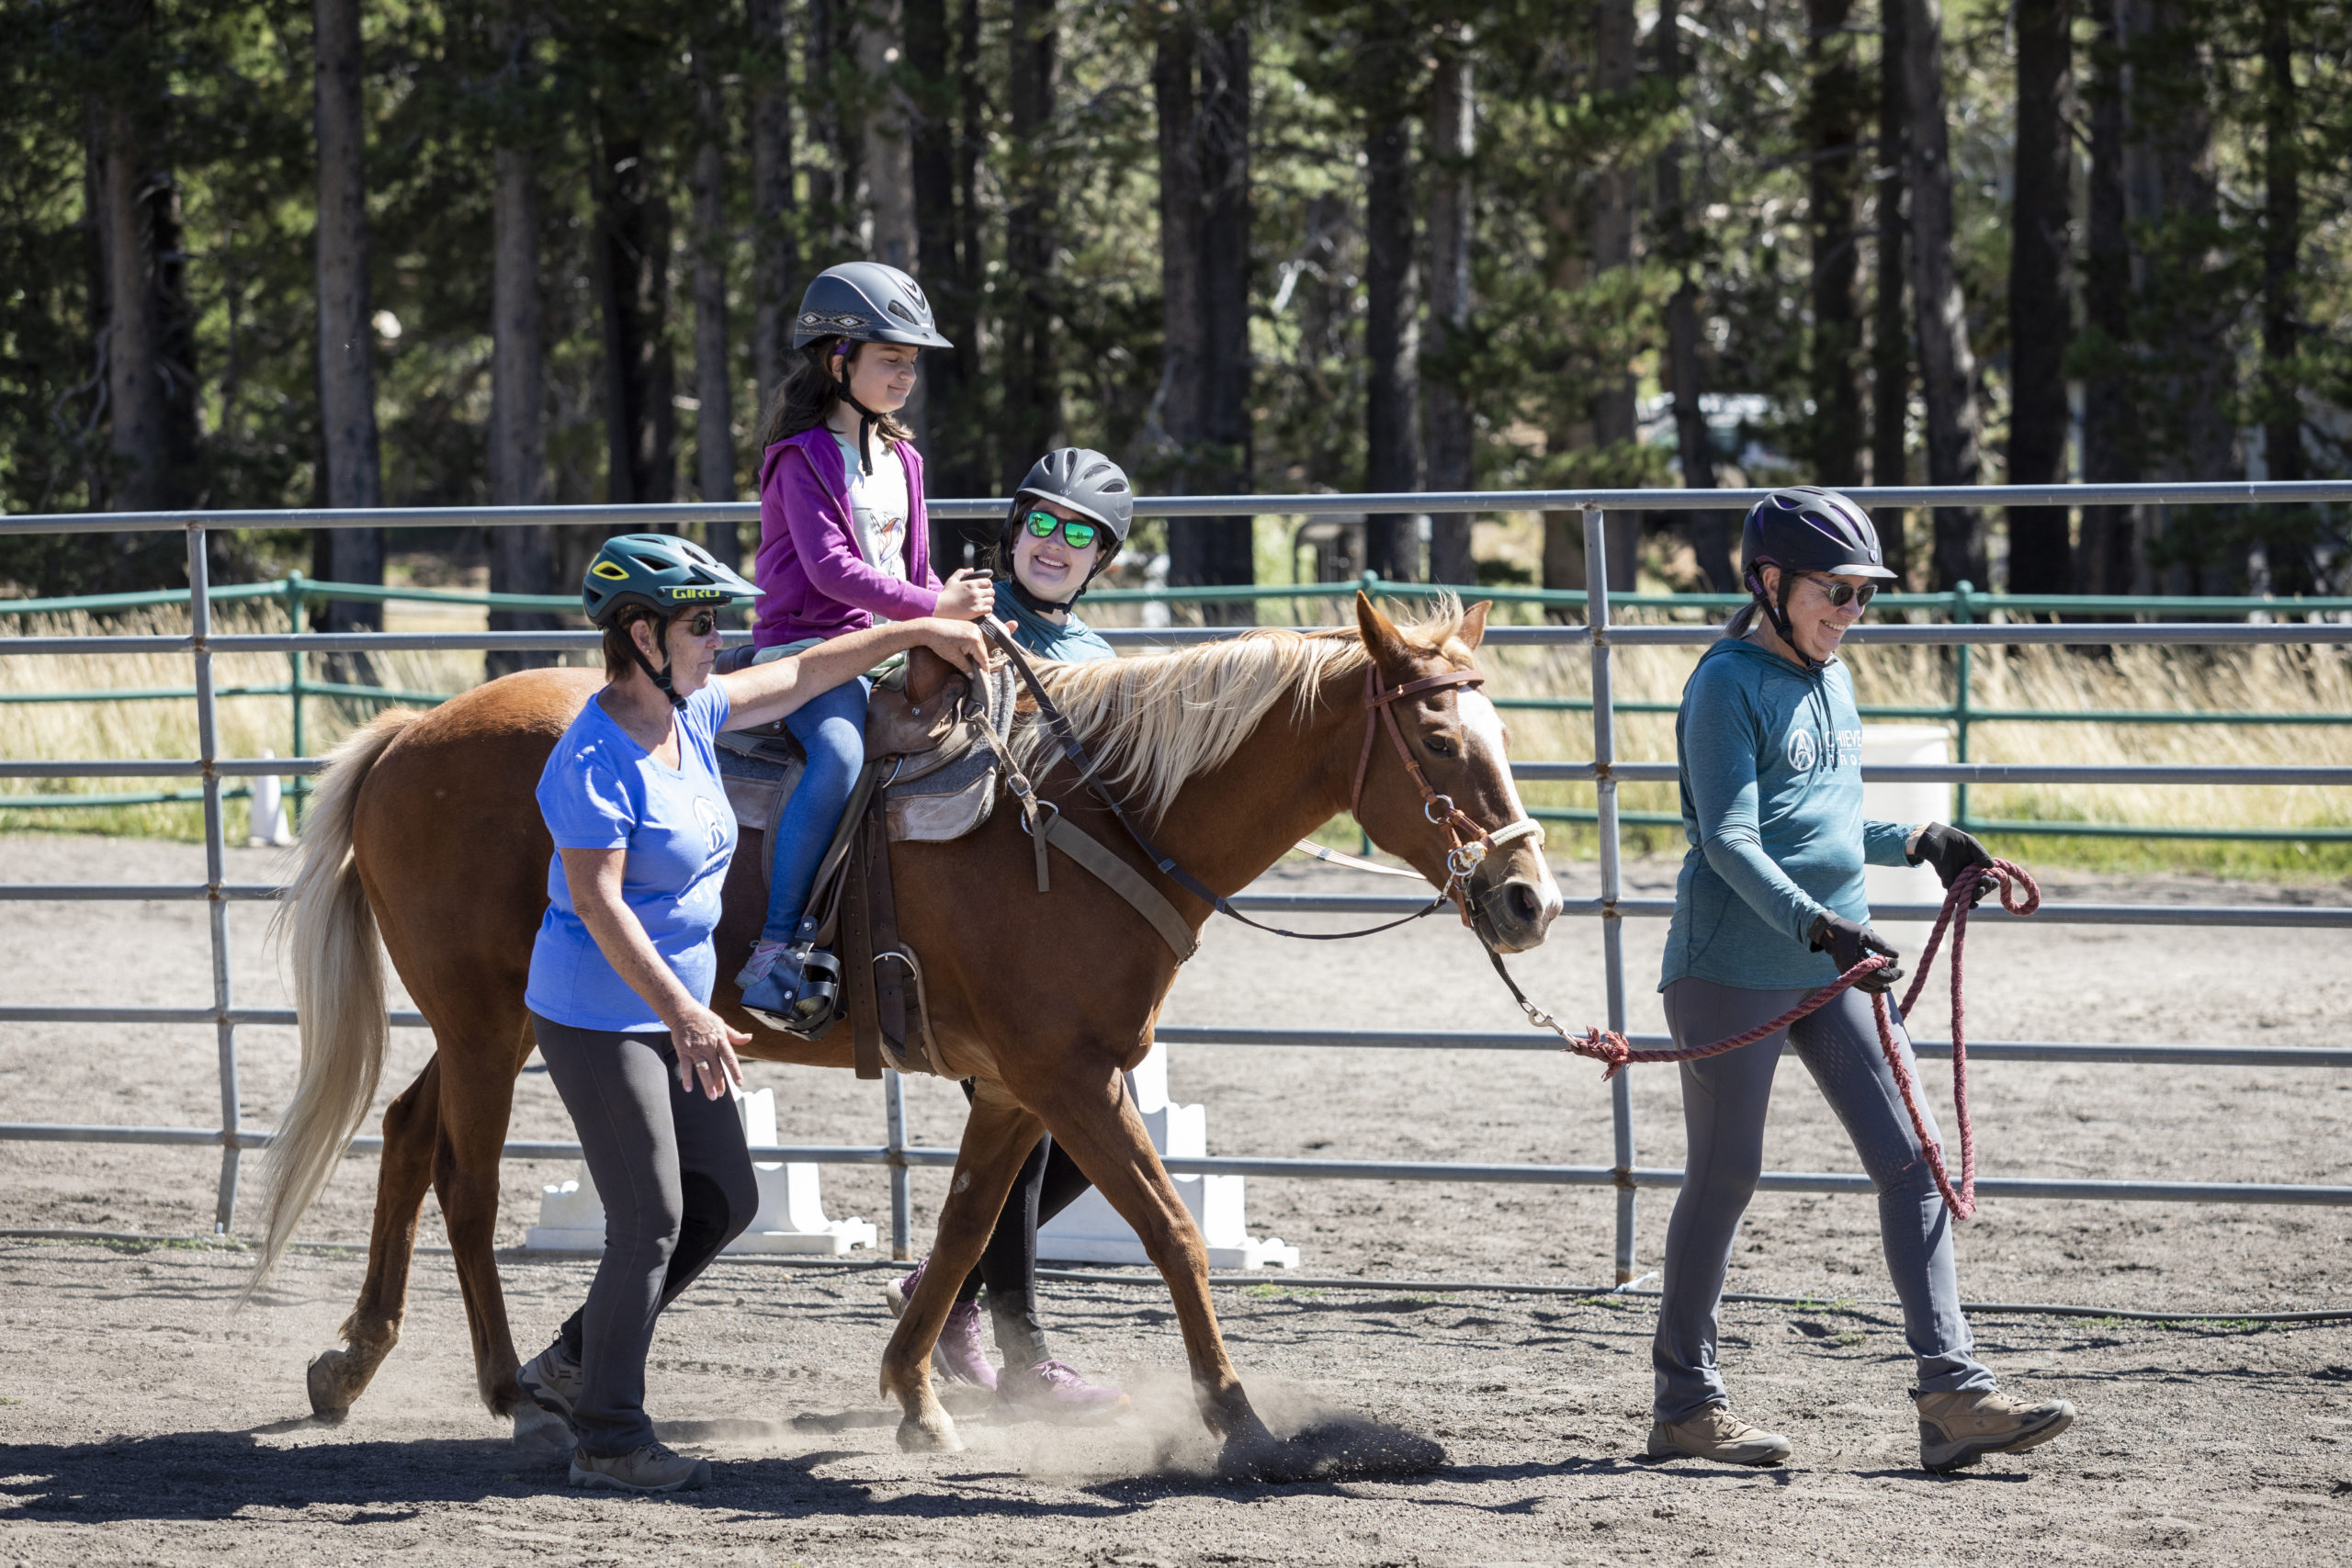 Riding with a Visual Impairment: My Equestrian Experience